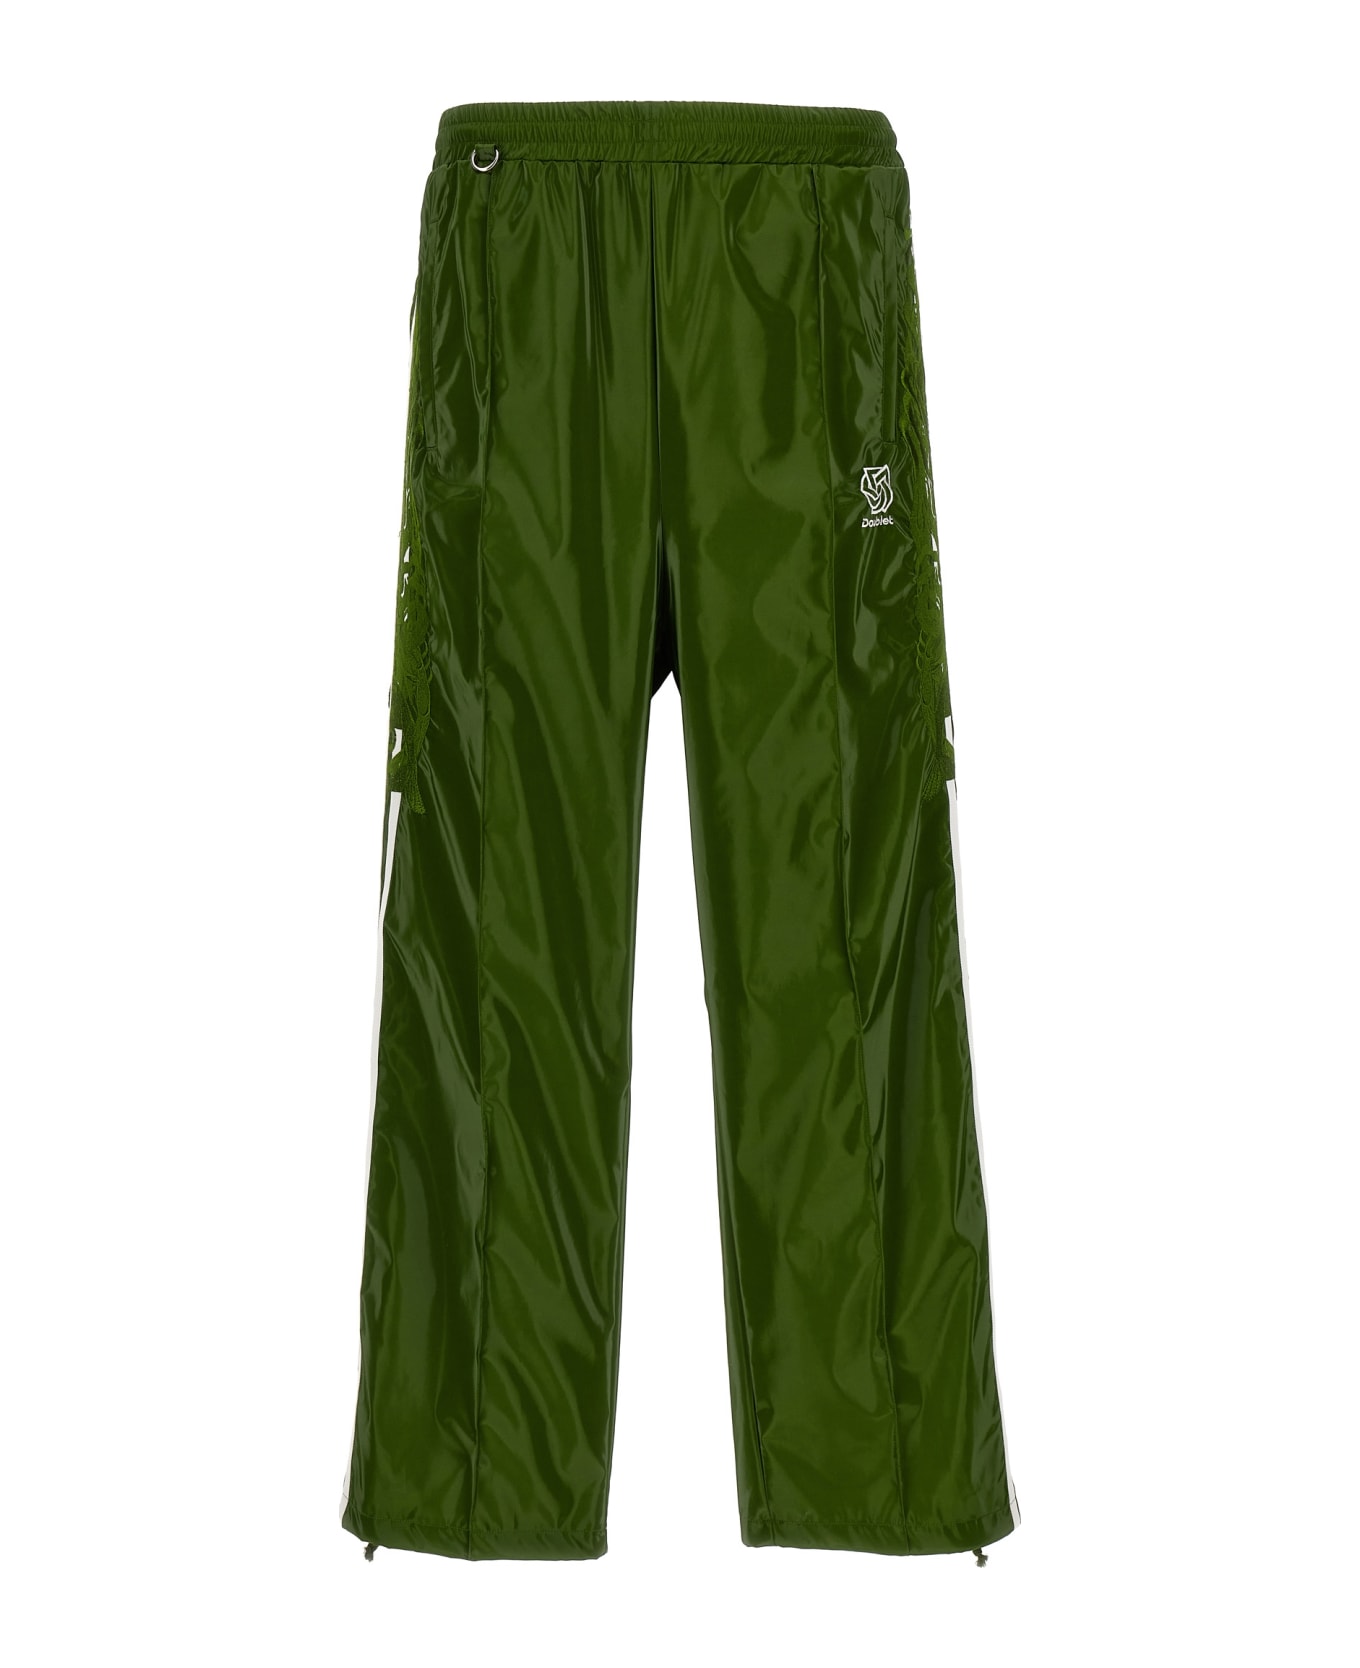 doublet 'laminate Track' Joggers - Green